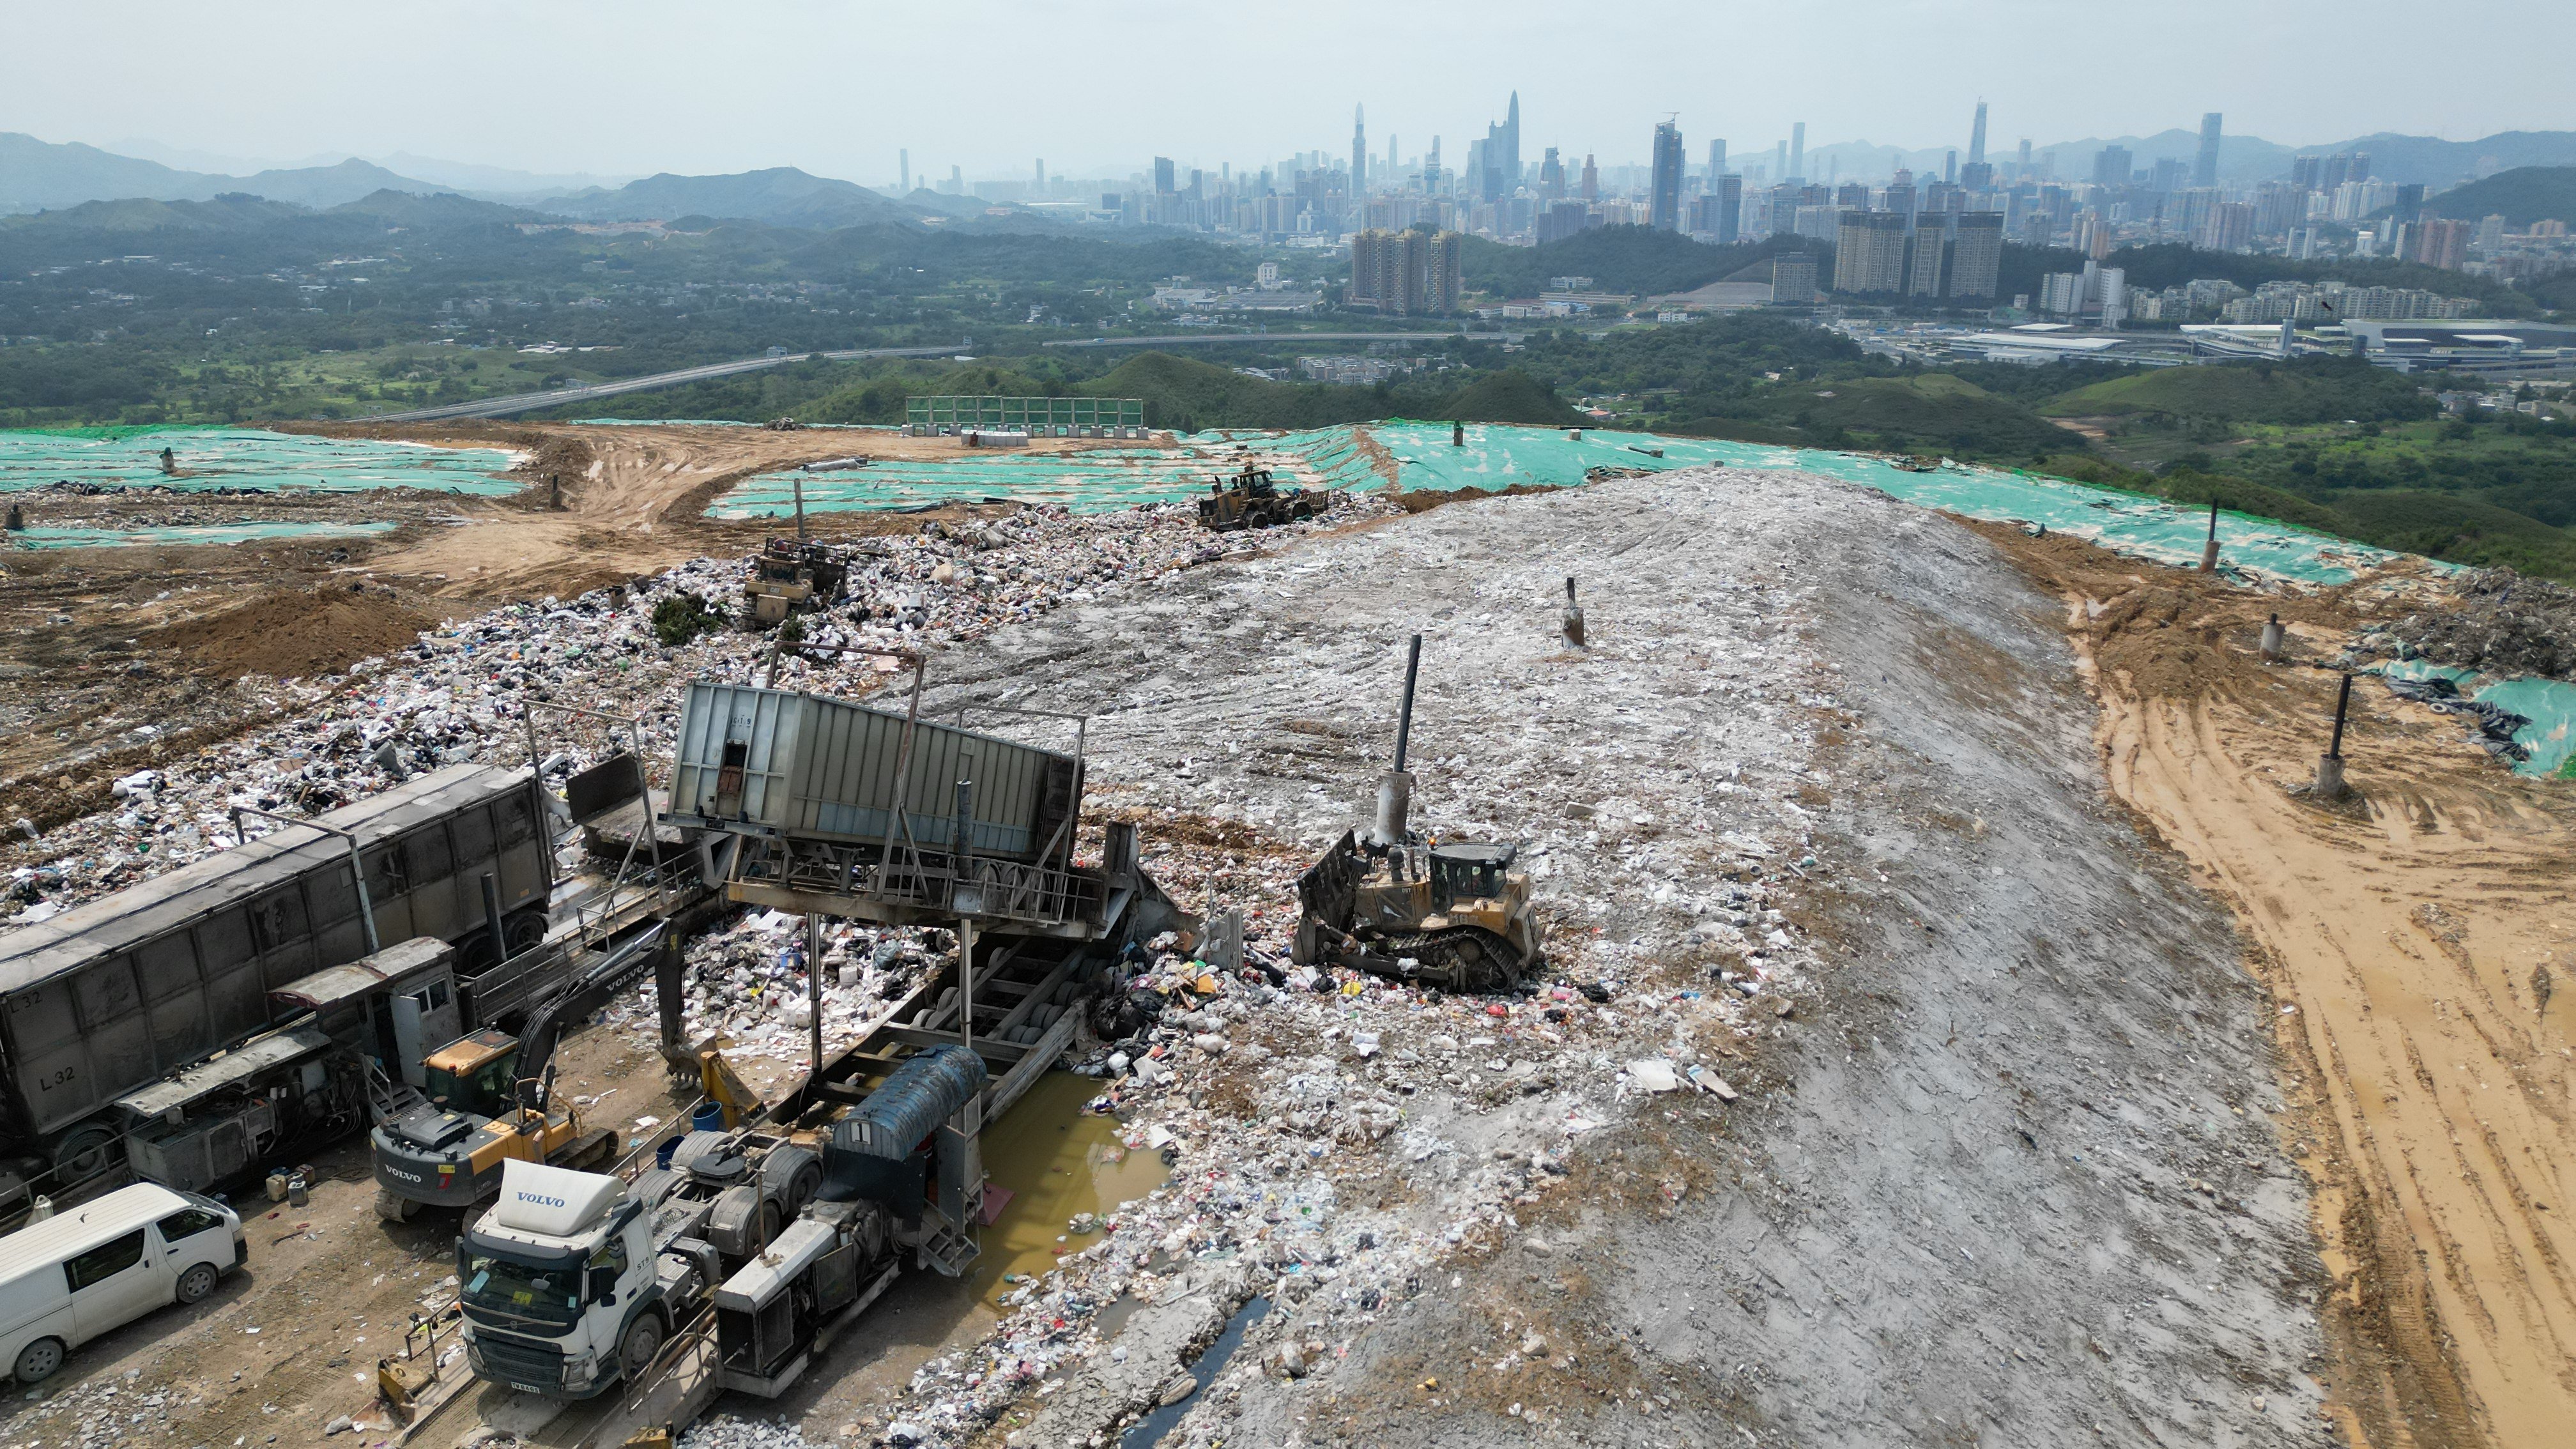 The North East New Territories Landfill. Hong Kong is among locations banned from shipping certain waste to mainland China. Photo: Felix Wong